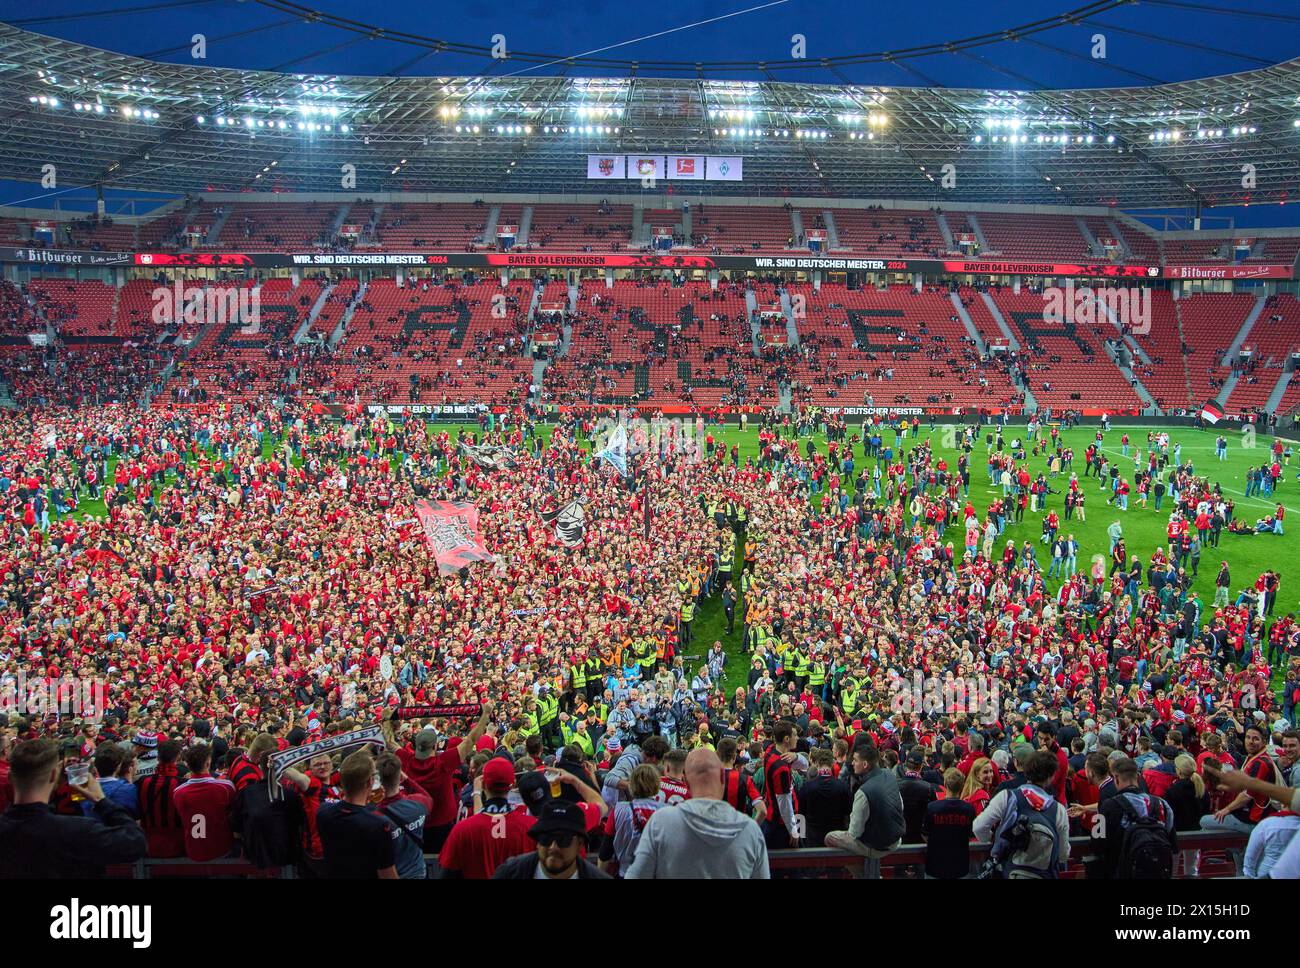 Fans enter the pitch and watch Xabi Alonso, Trainer, headcoach teammanager Leverkusen at the press conference after the match BAYER 04 LEVERKUSEN - SV WERDER BREMEN 5-0   on April 14, 2024 in Leverkusen, Germany. Season 2023/2024, 1.Bundesliga,, matchday 29, 29.Spieltag Photographer: ddp images / star-images    - DFL REGULATIONS PROHIBIT ANY USE OF PHOTOGRAPHS as IMAGE SEQUENCES and/or QUASI-VIDEO - Stock Photo